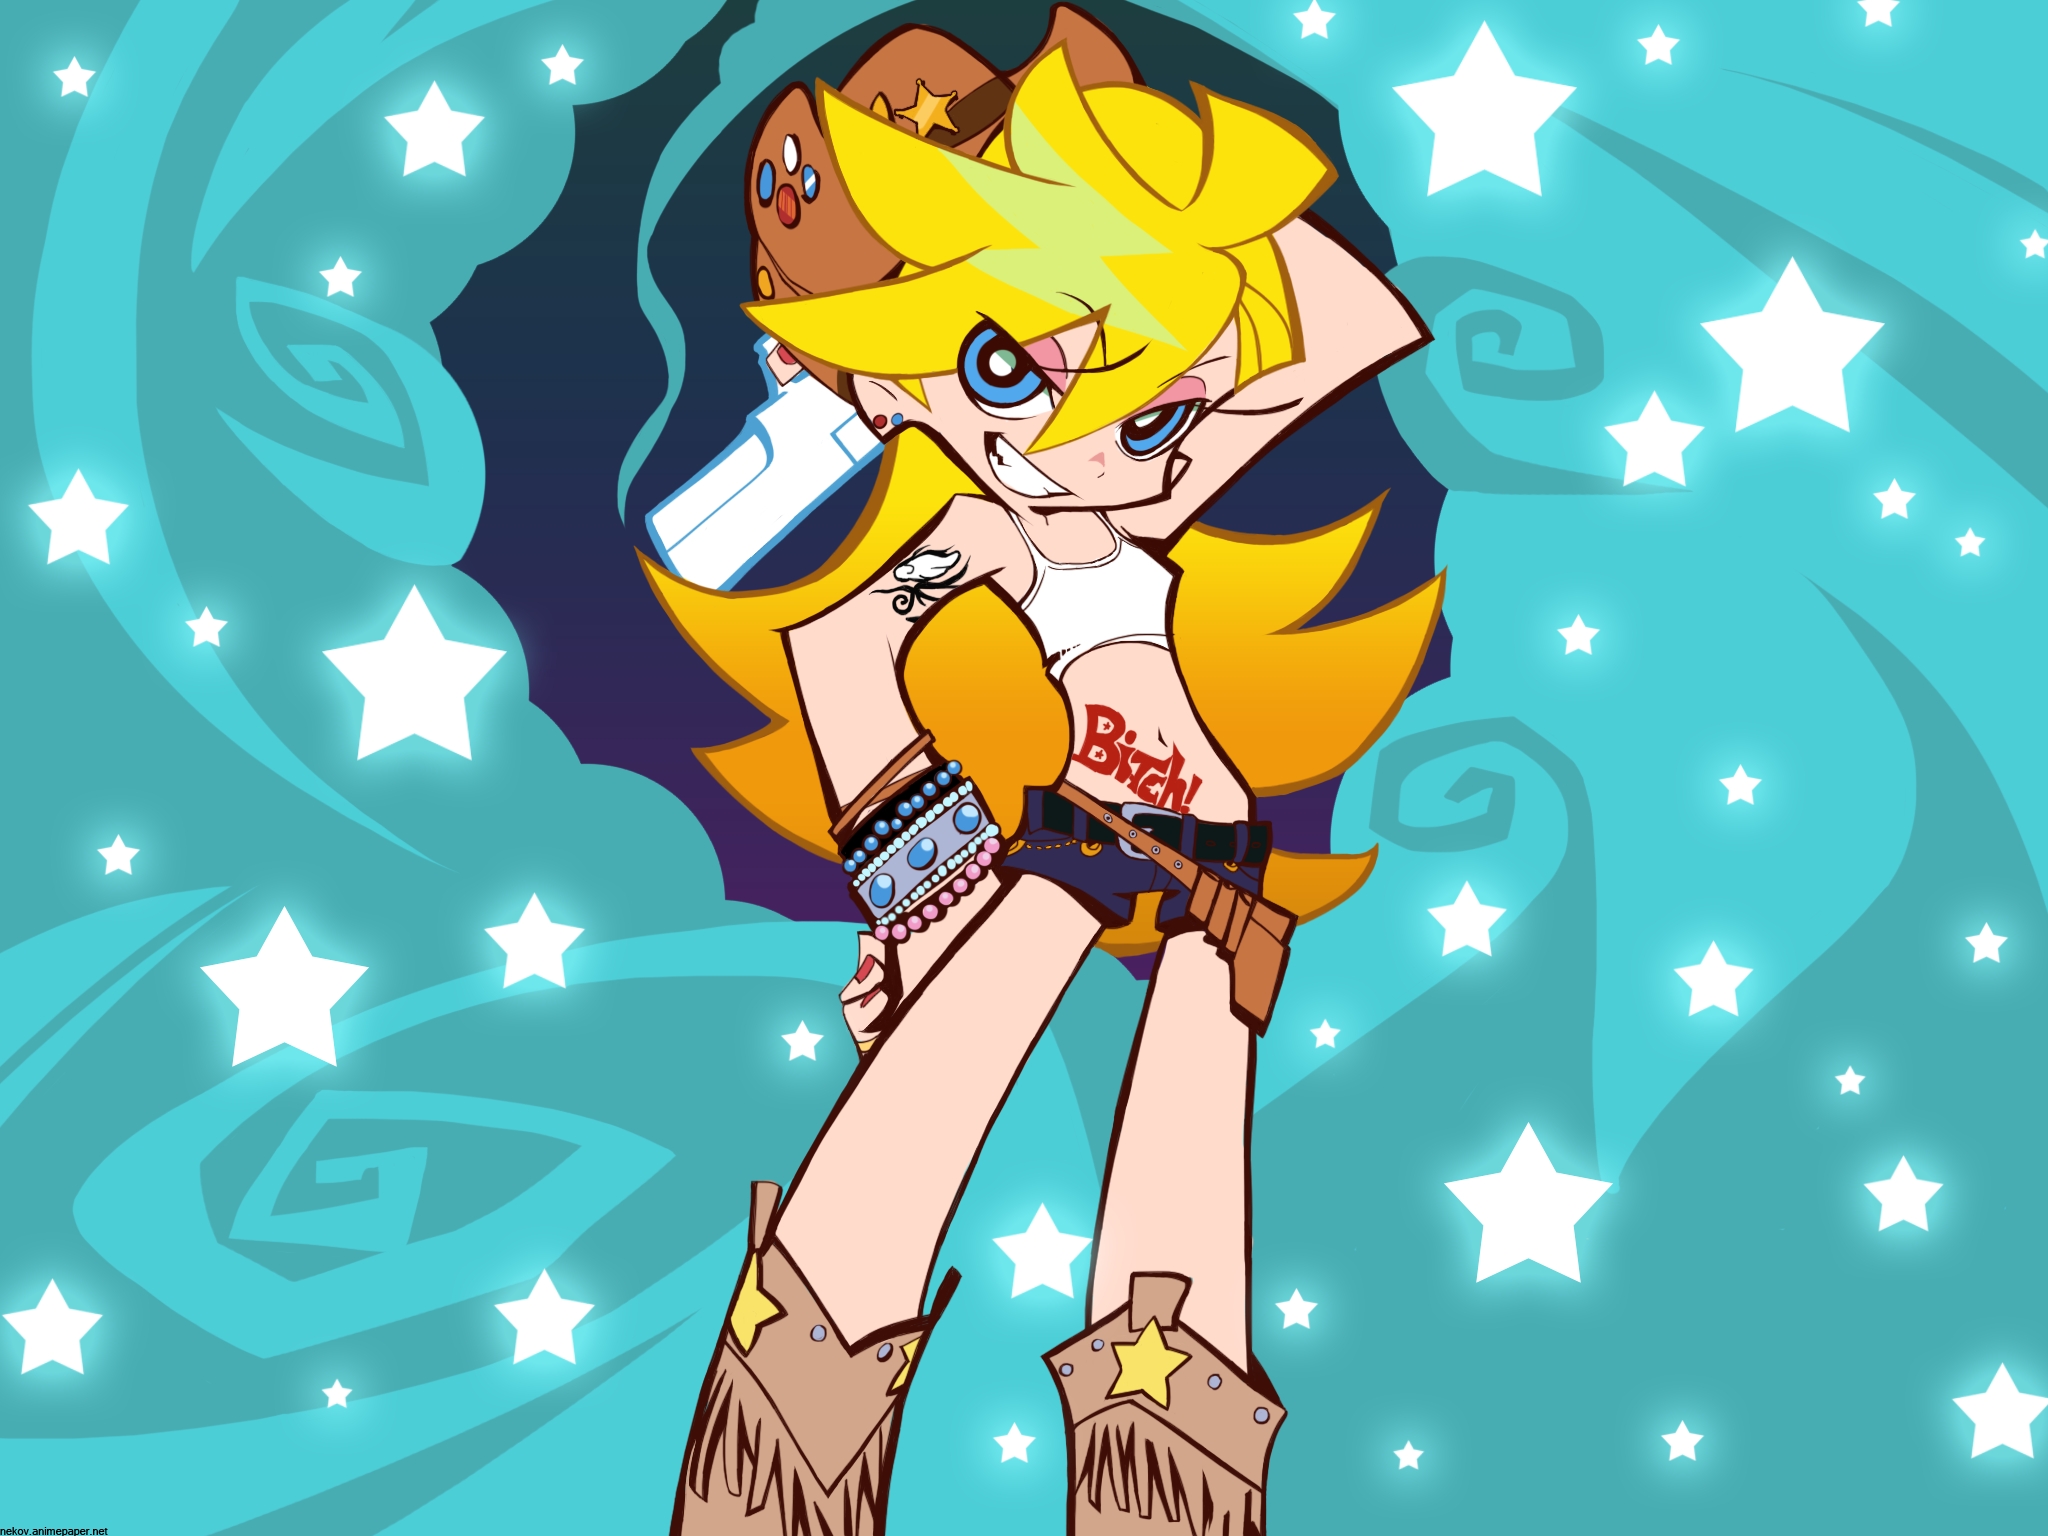 panty & stocking with garterbelt, anime, panty anarchy download HD wallpaper